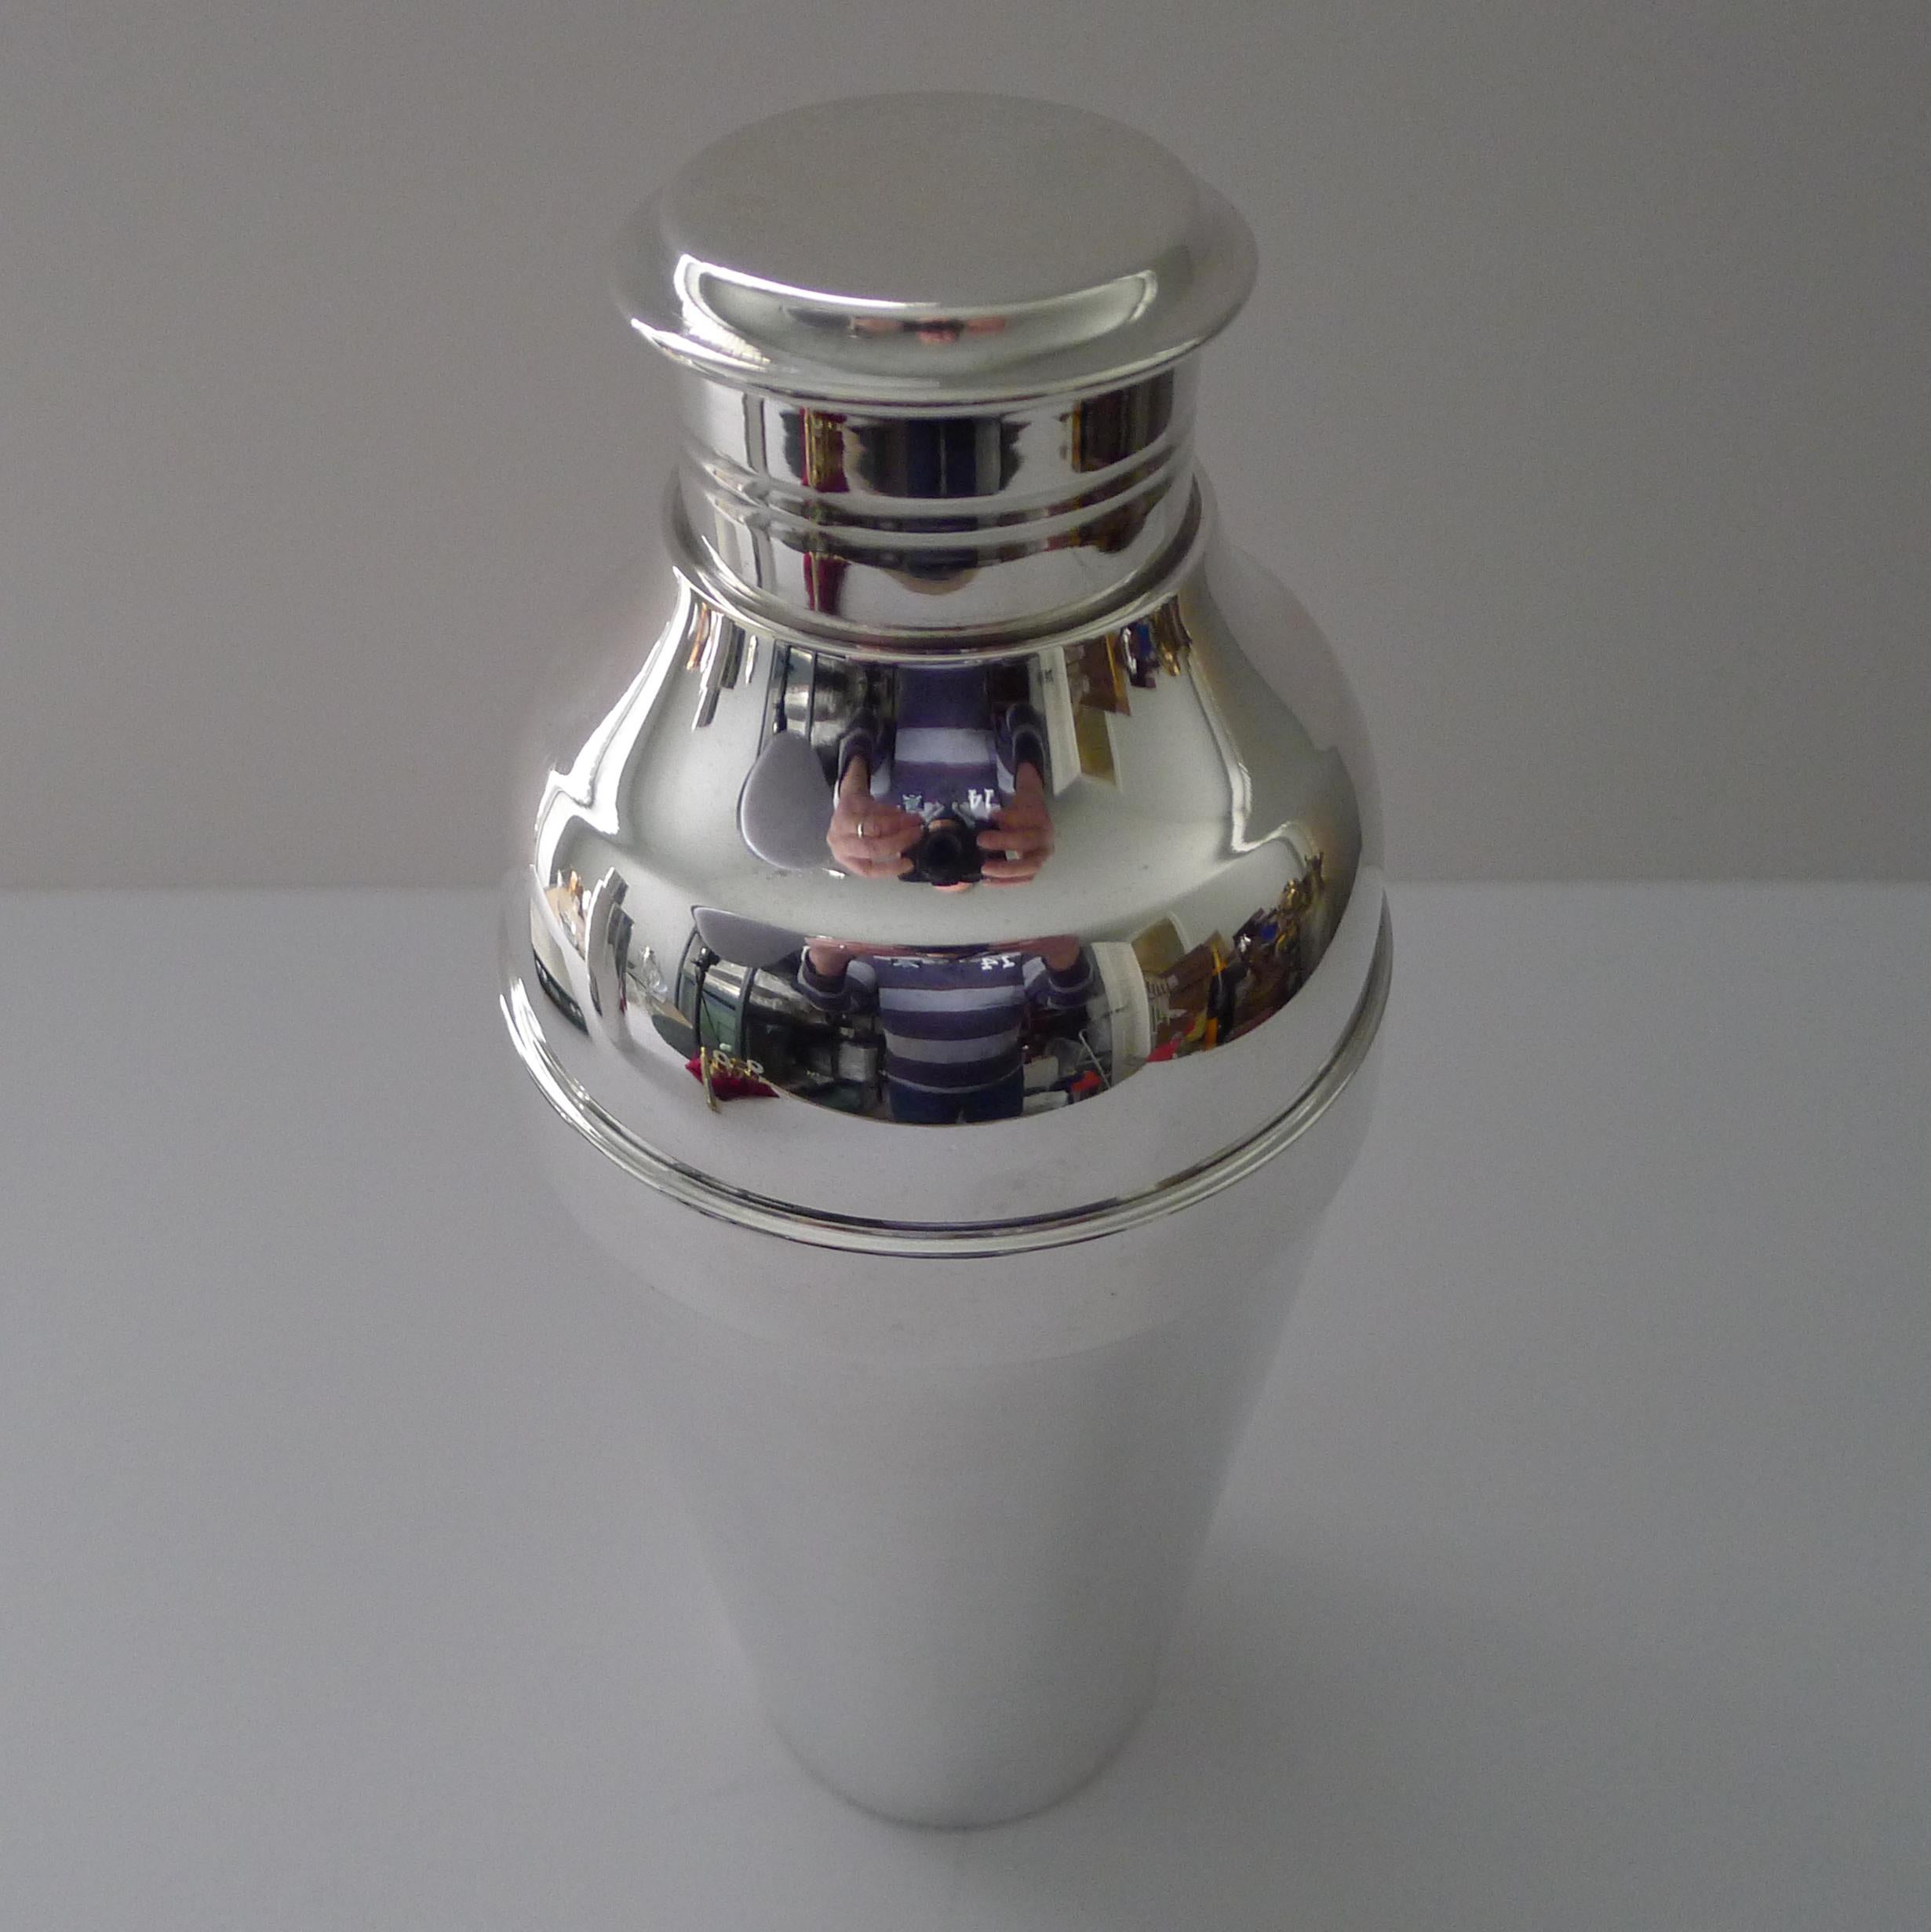 A handsome Art Deco silver plated cocktail shaker by top quality silversmith Christofle as part of their Gallia range in the Ondulations design.

This design was created for the luxury liner SS Normandie by the designer Luc Lanel. This grand Ocean